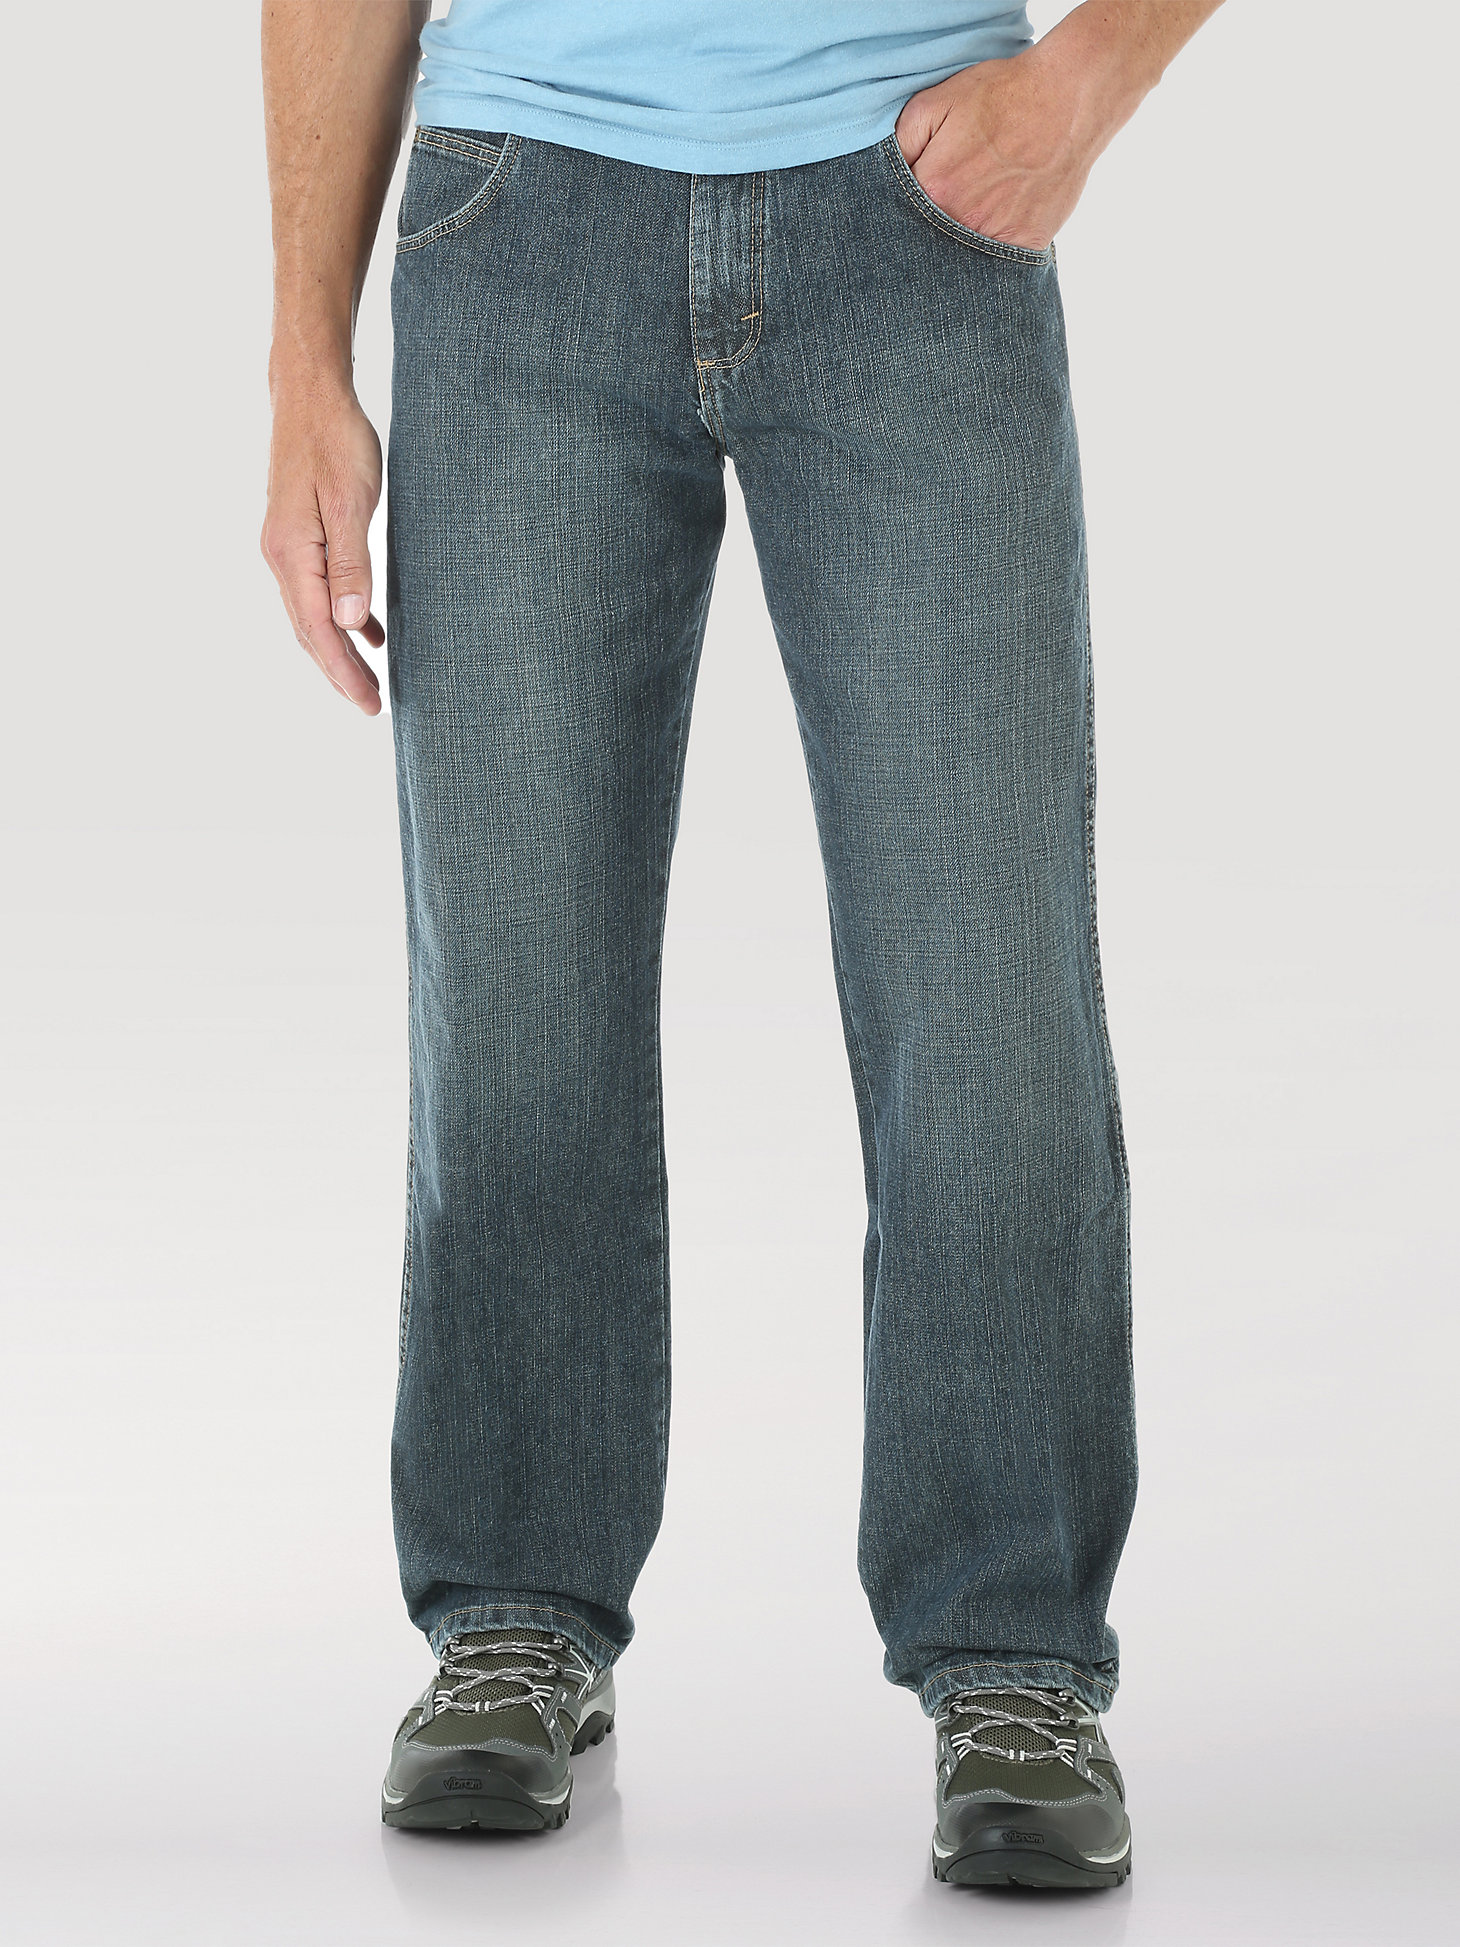 Wrangler Rugged Wear® Relaxed Fit Mid Rise Jean in Granite main view